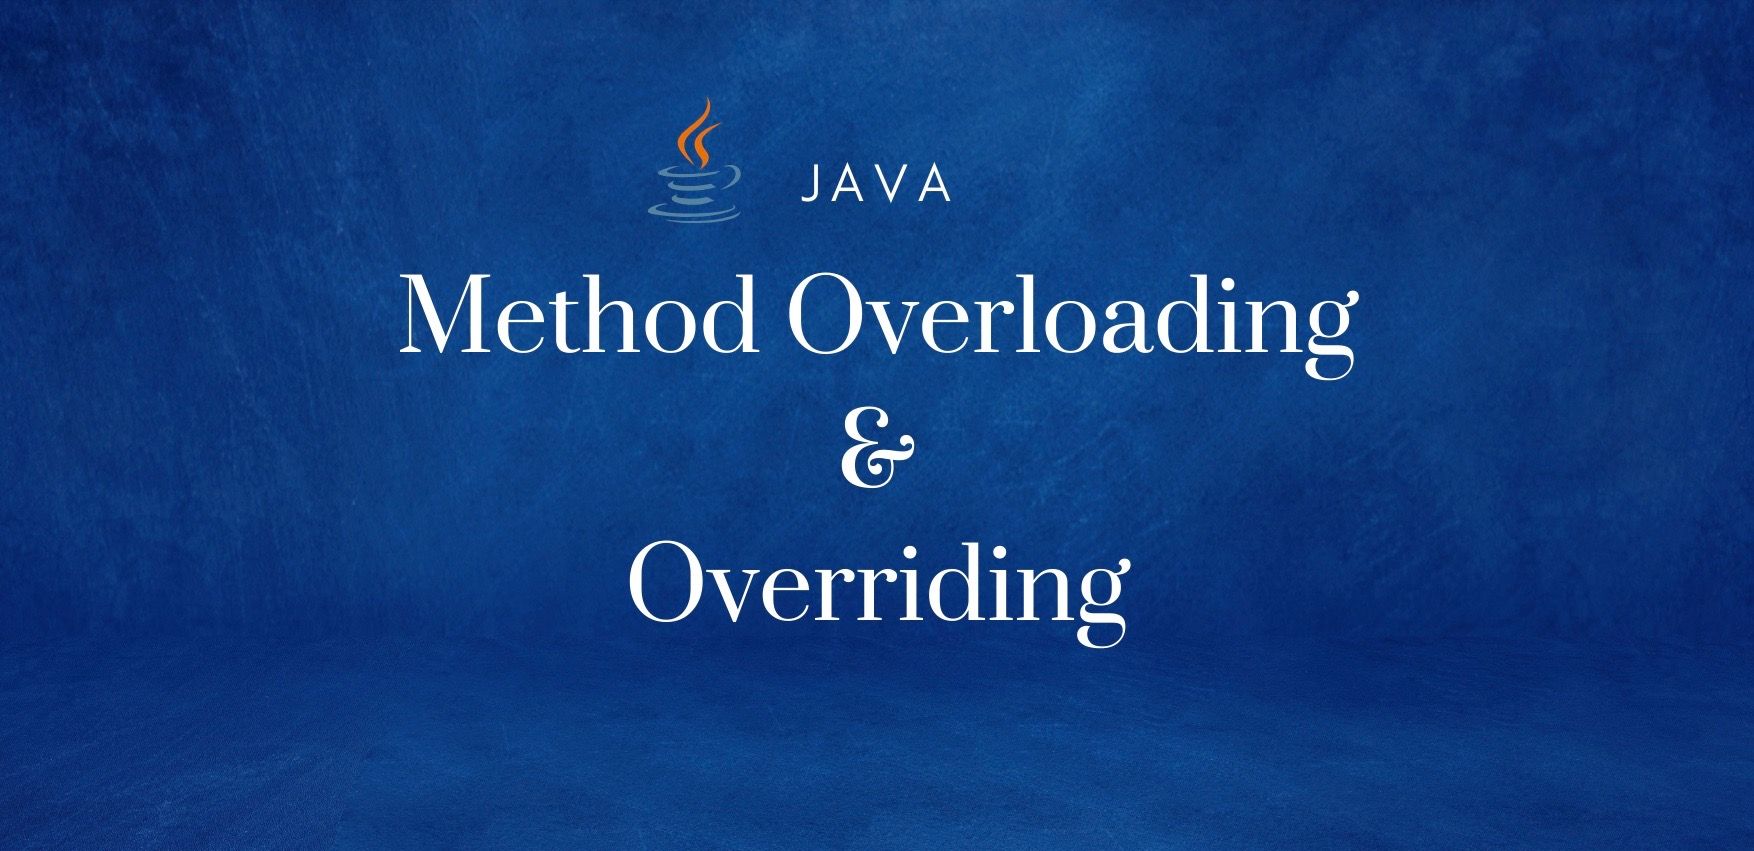 Function Overloading in Python. Recently in one of the